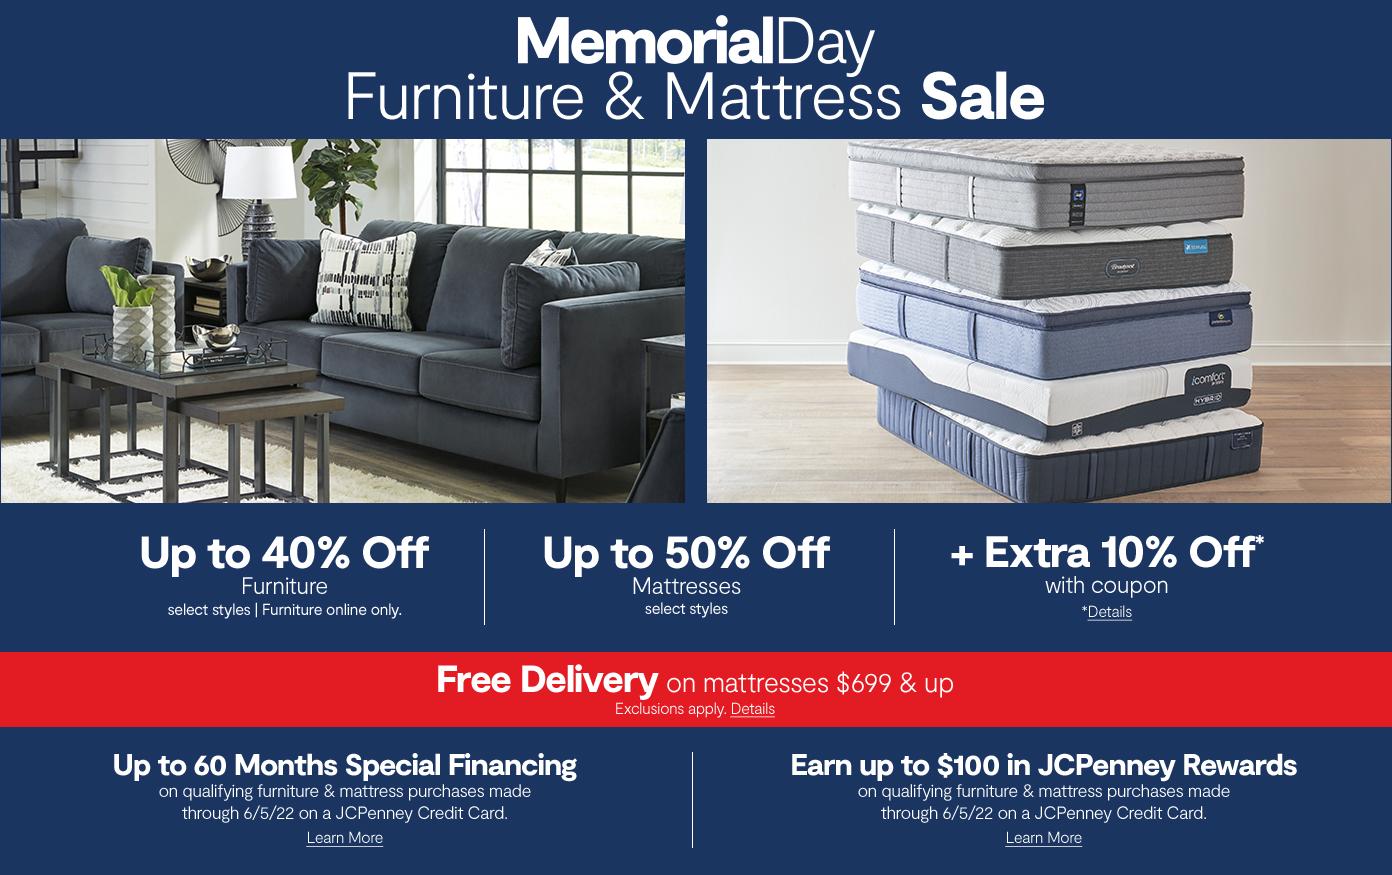 Memorial Day Furniture & Mattress Sale Up to 40% off furniture. up to 50% off mattresses extra 10% with coupon